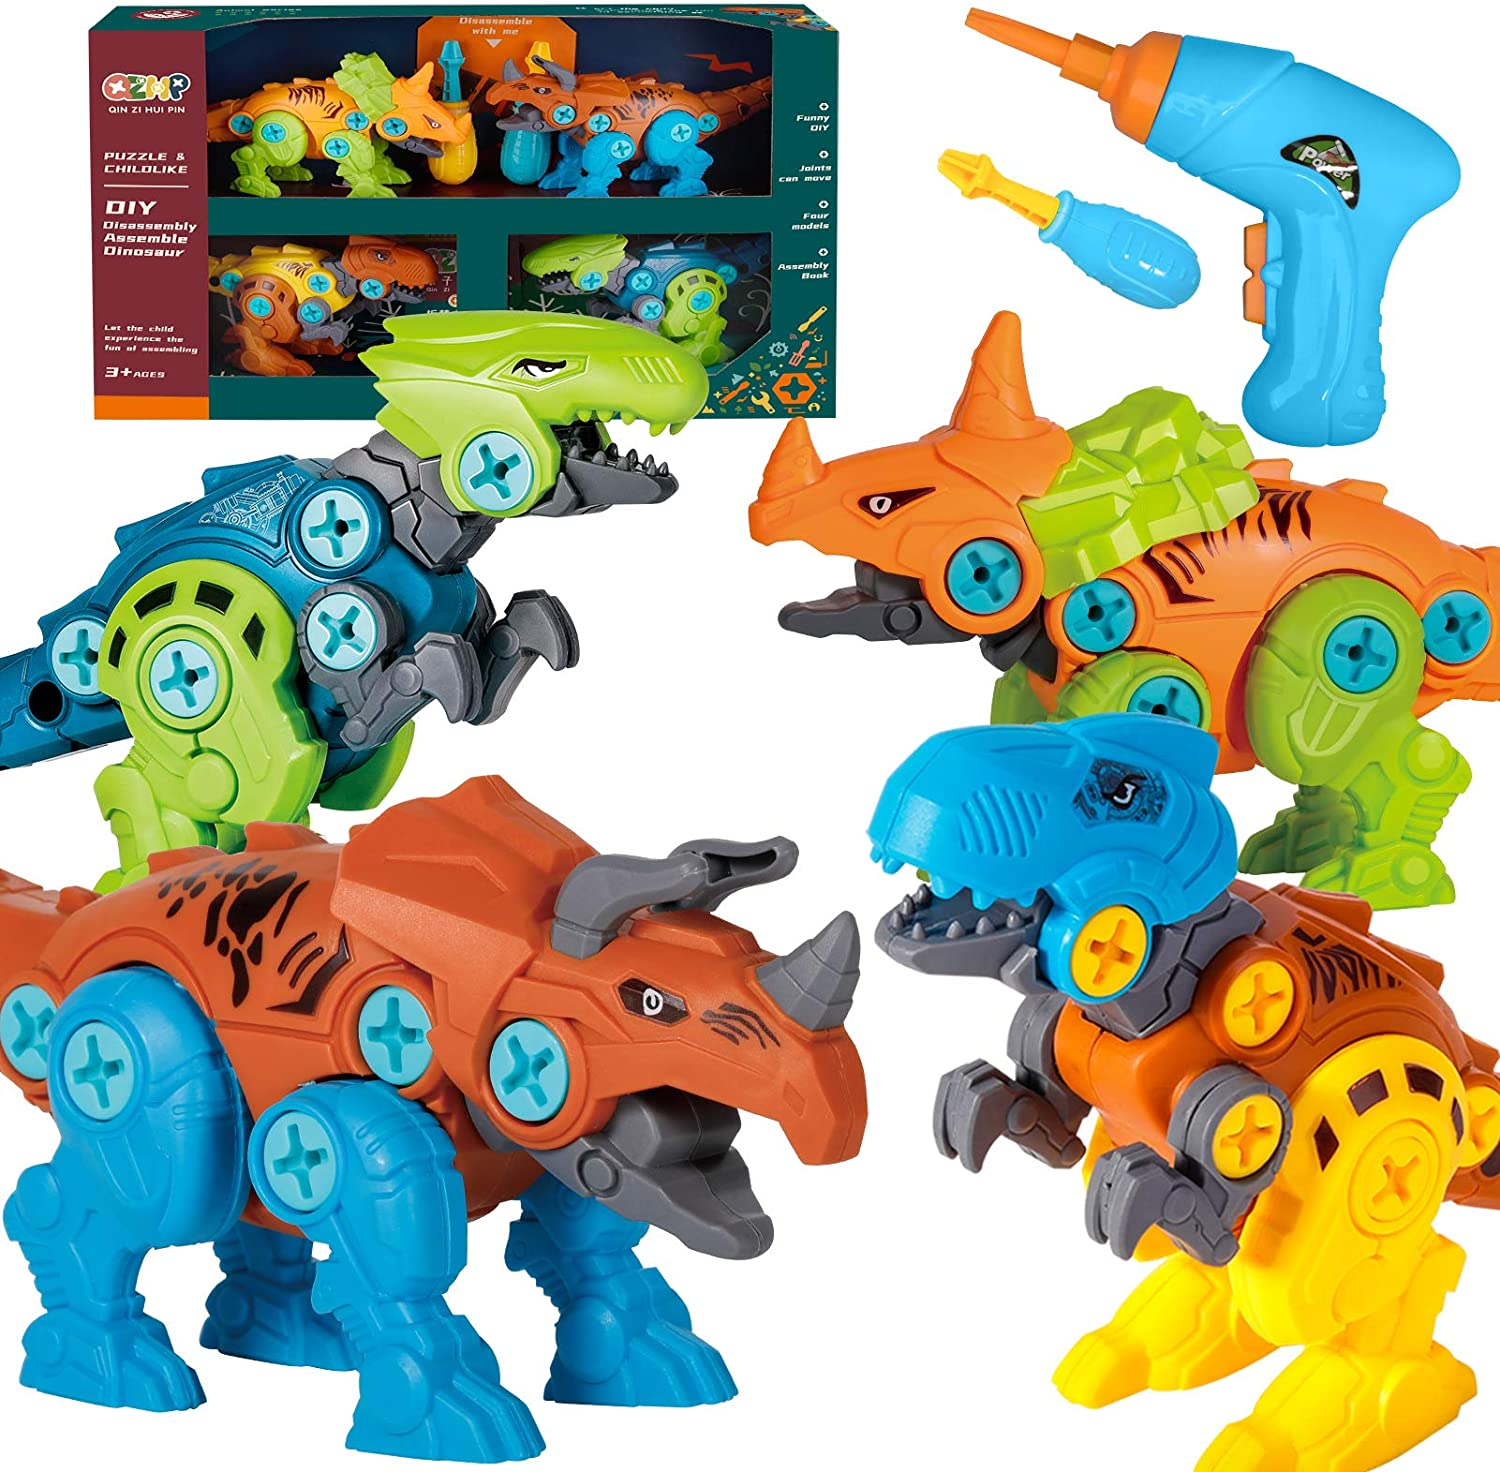 Build Dinosaur toys for kids with Electric Drill STEM Construction Engineering Play Tool Set with Dinosaur Figures for 3-7 Boys and Girls Birthday Gifts Take Apart Dinosaur Toys for Kids 